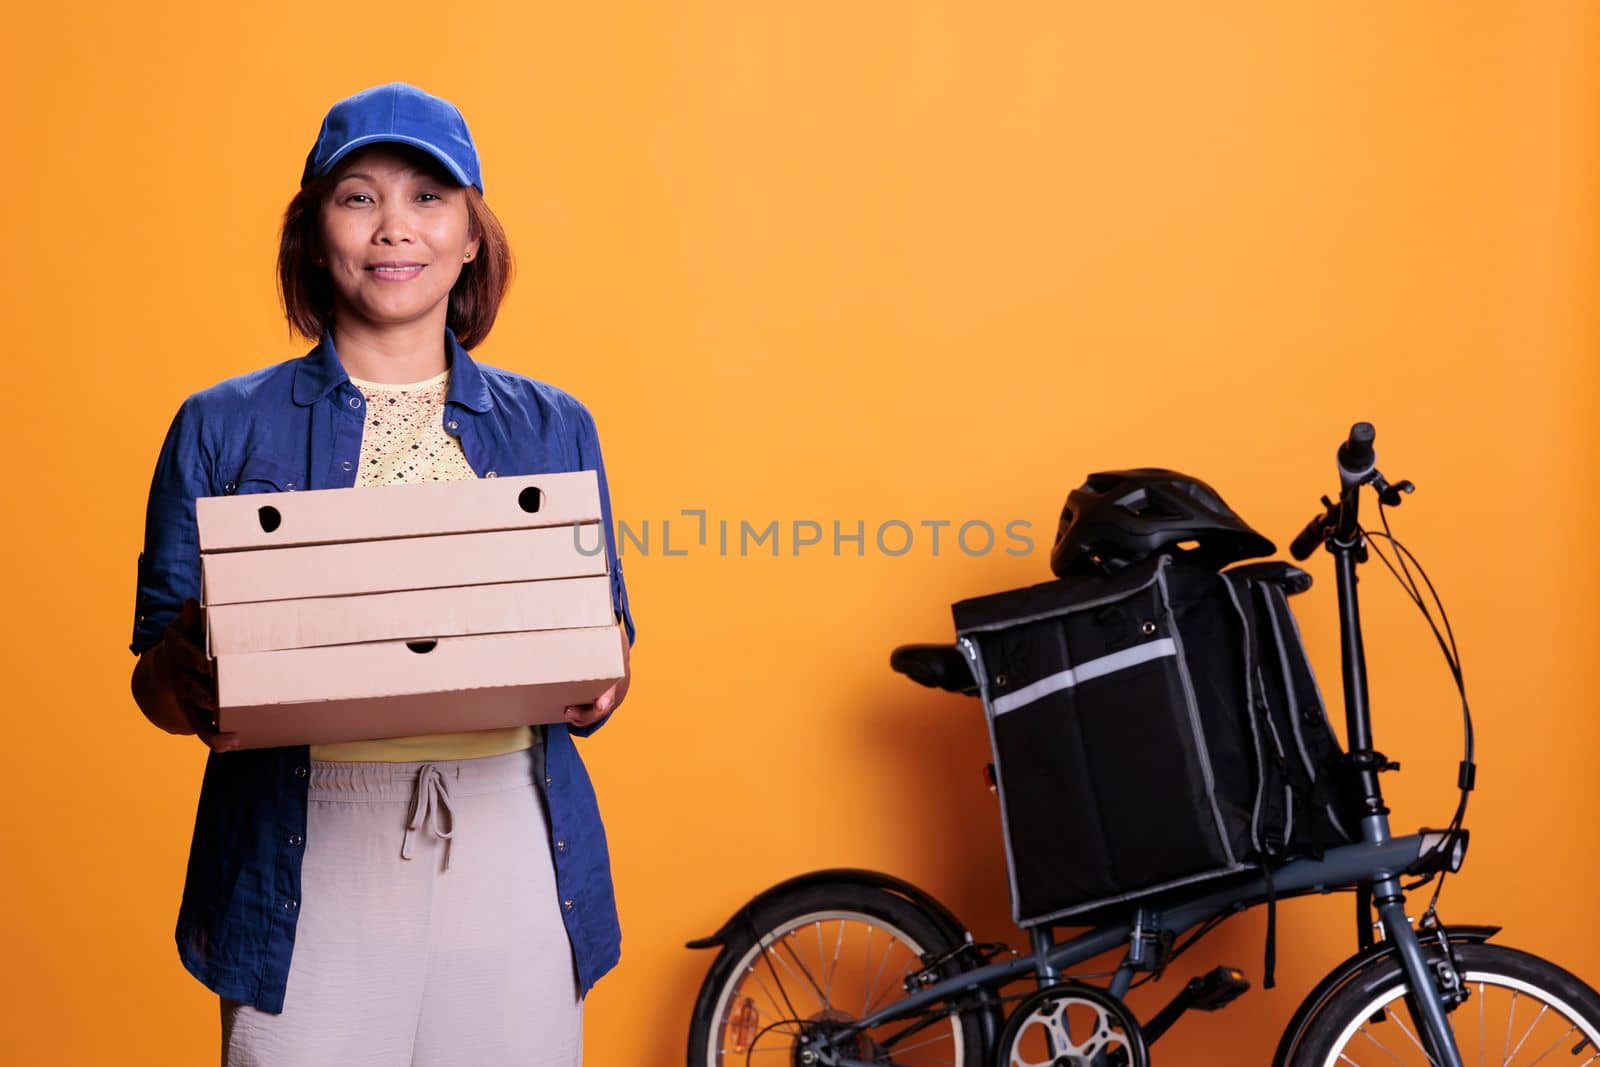 Restaurant worker wearing blue uniform holding stack of pizza delivering to customer by DCStudio